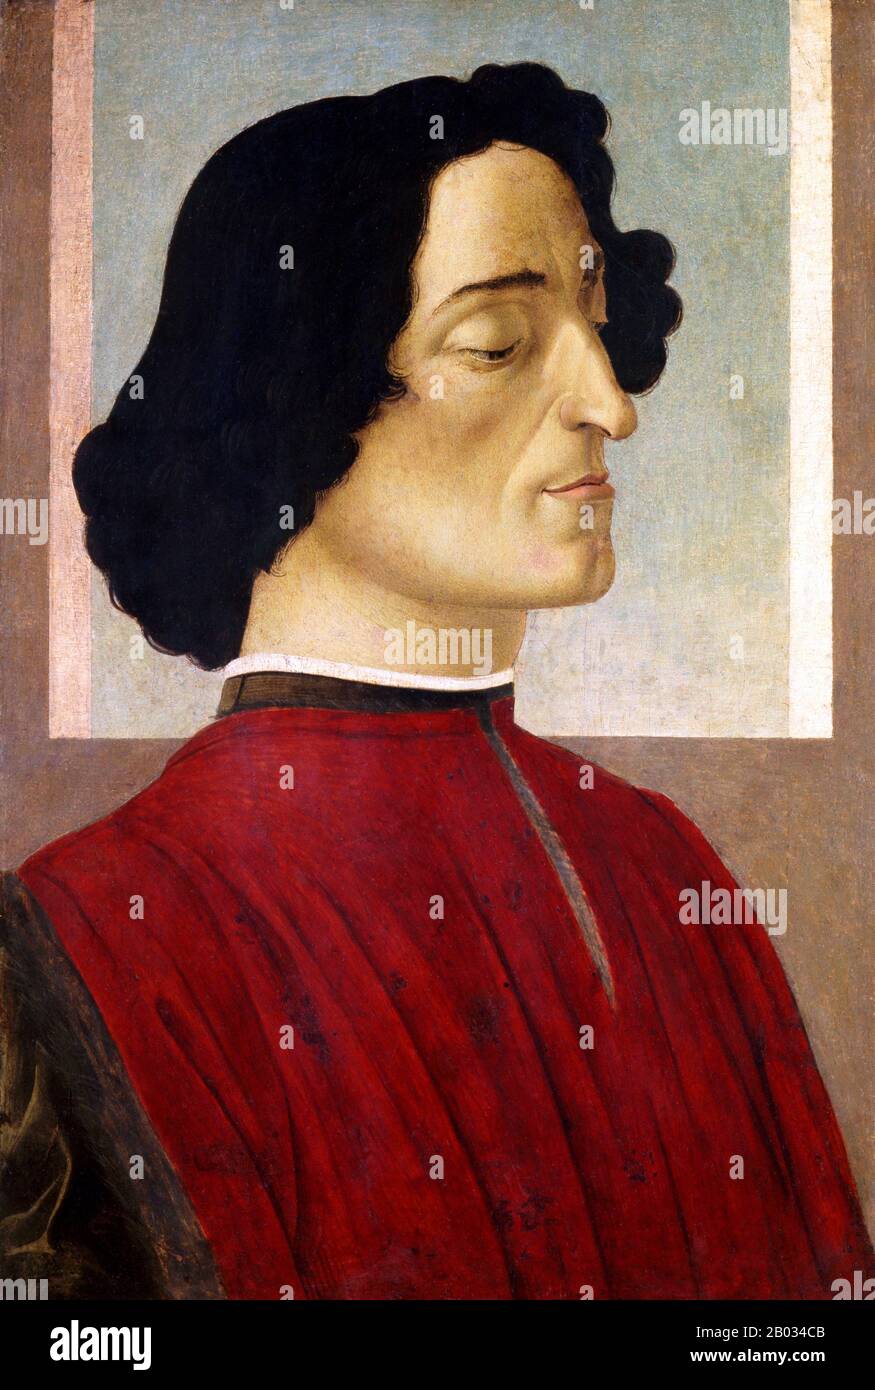 Giuliano de' Medici (25 March 1453 – 26 April 1478) was the second son of Piero de' Medici and Lucrezia Tornabuoni. He was co-ruler of Florence, with his brother Lorenzo the Magnificent.   Alessandro di Mariano di Vanni Filipepi, known as Sandro Botticelli (c. 1445 – May 17, 1510), was an Italian painter of the Early Renaissance. He belonged to the Florentine School under the patronage of Lorenzo de' Medici, a movement that Giorgio Vasari would characterize less than a hundred years later in his Vita of Botticelli as a 'golden age'.   Botticelli's posthumous reputation suffered until the late Stock Photo